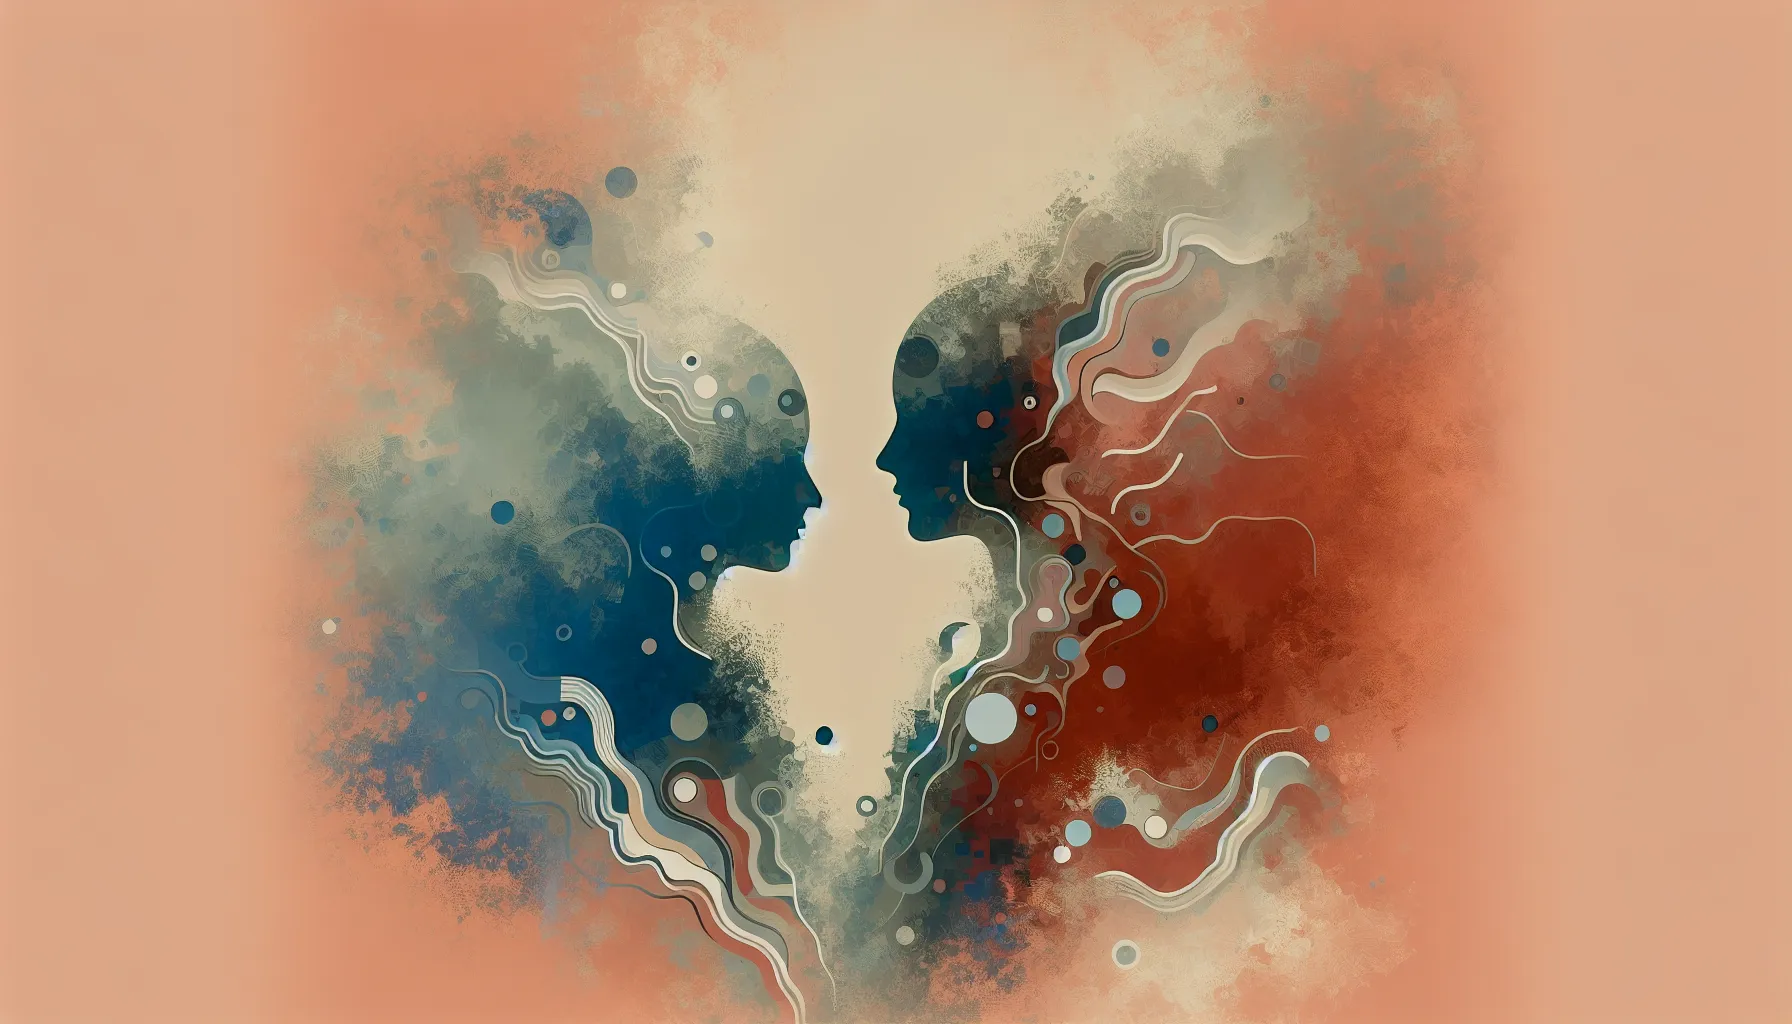 <strong>Between Us, an Unspoken Distance:</strong> As the vibrant hues of intimacy fade to muted tones, the gap widens, reflecting the unvoiced void in a once-passionate connection.